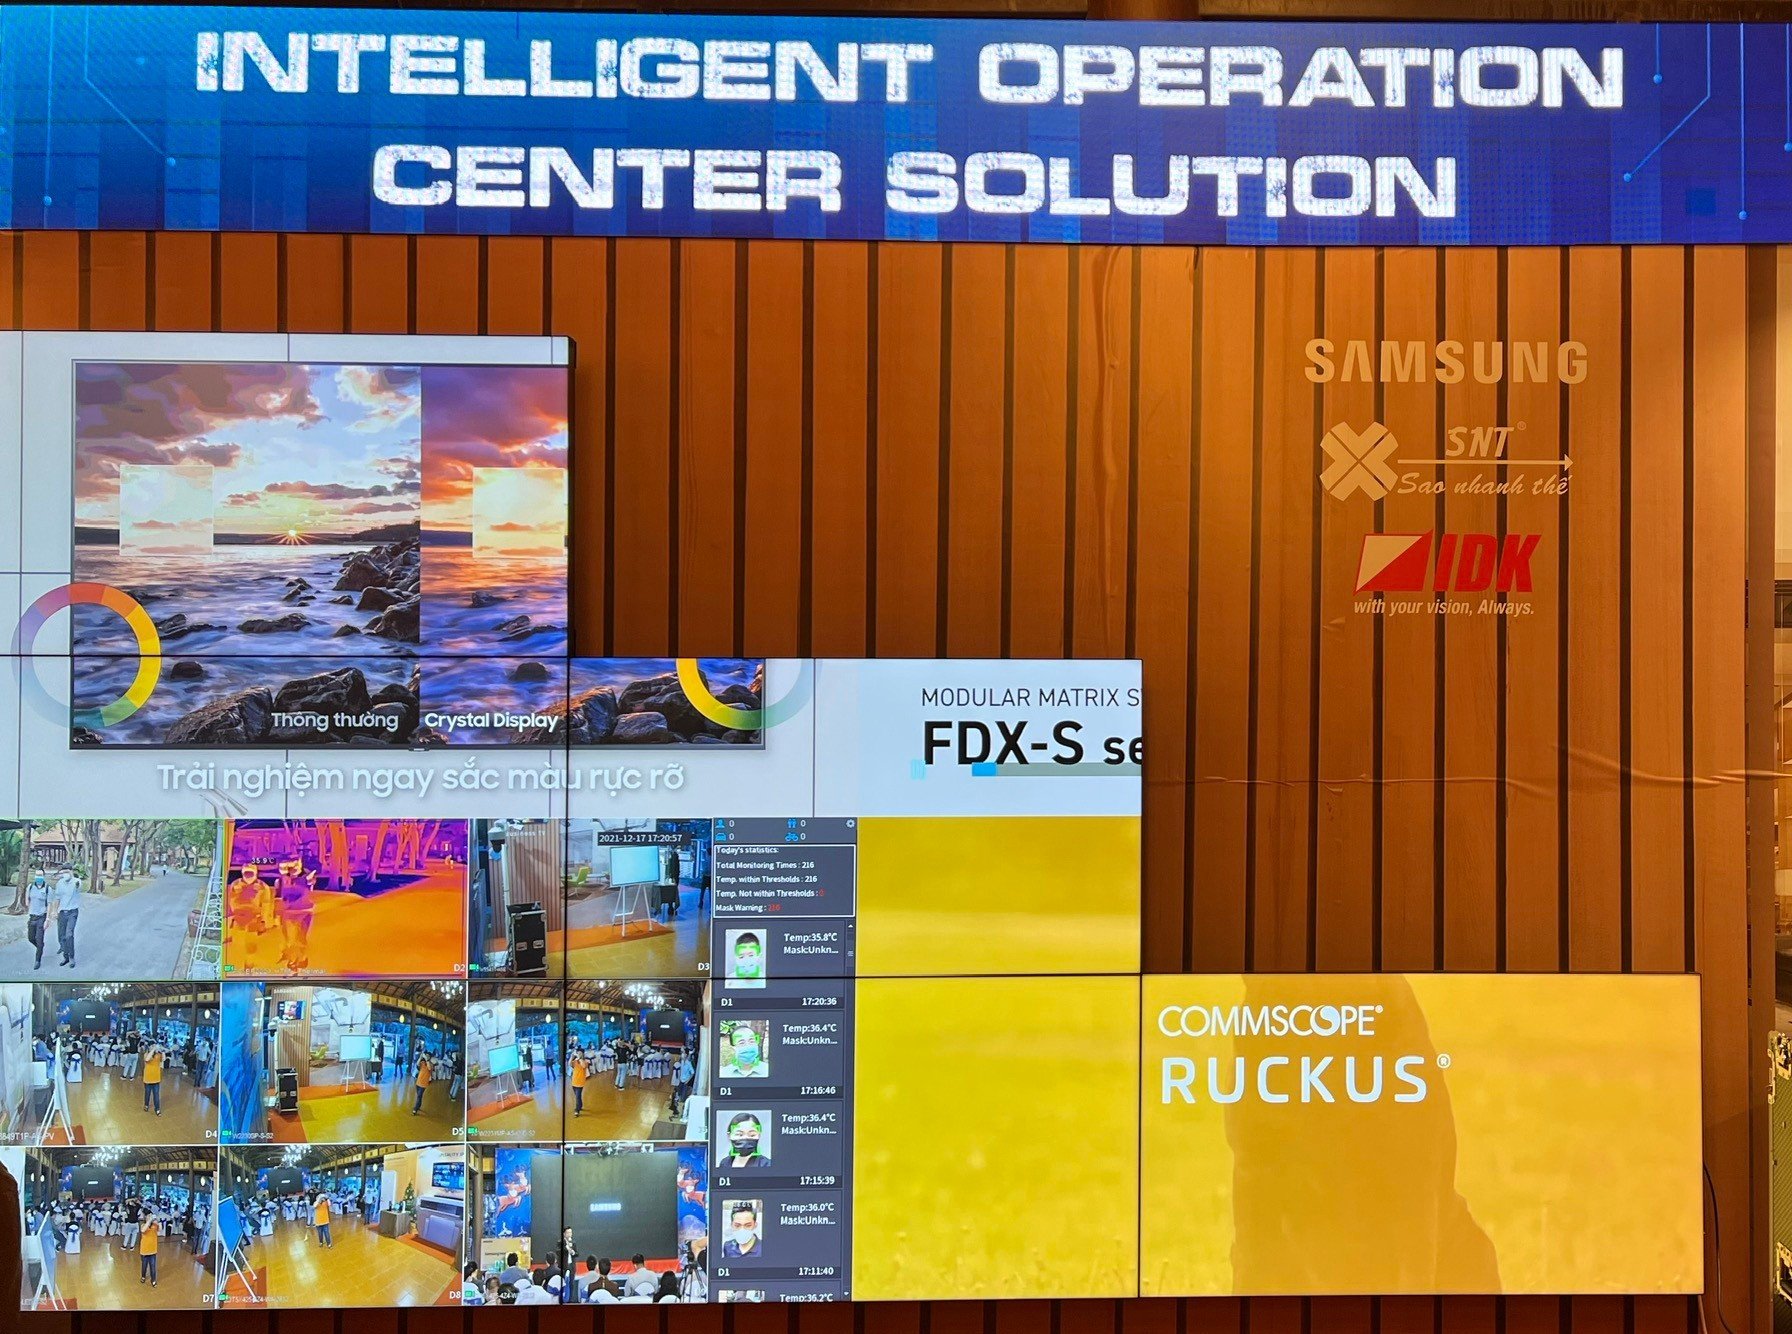 Display solution for information operations center